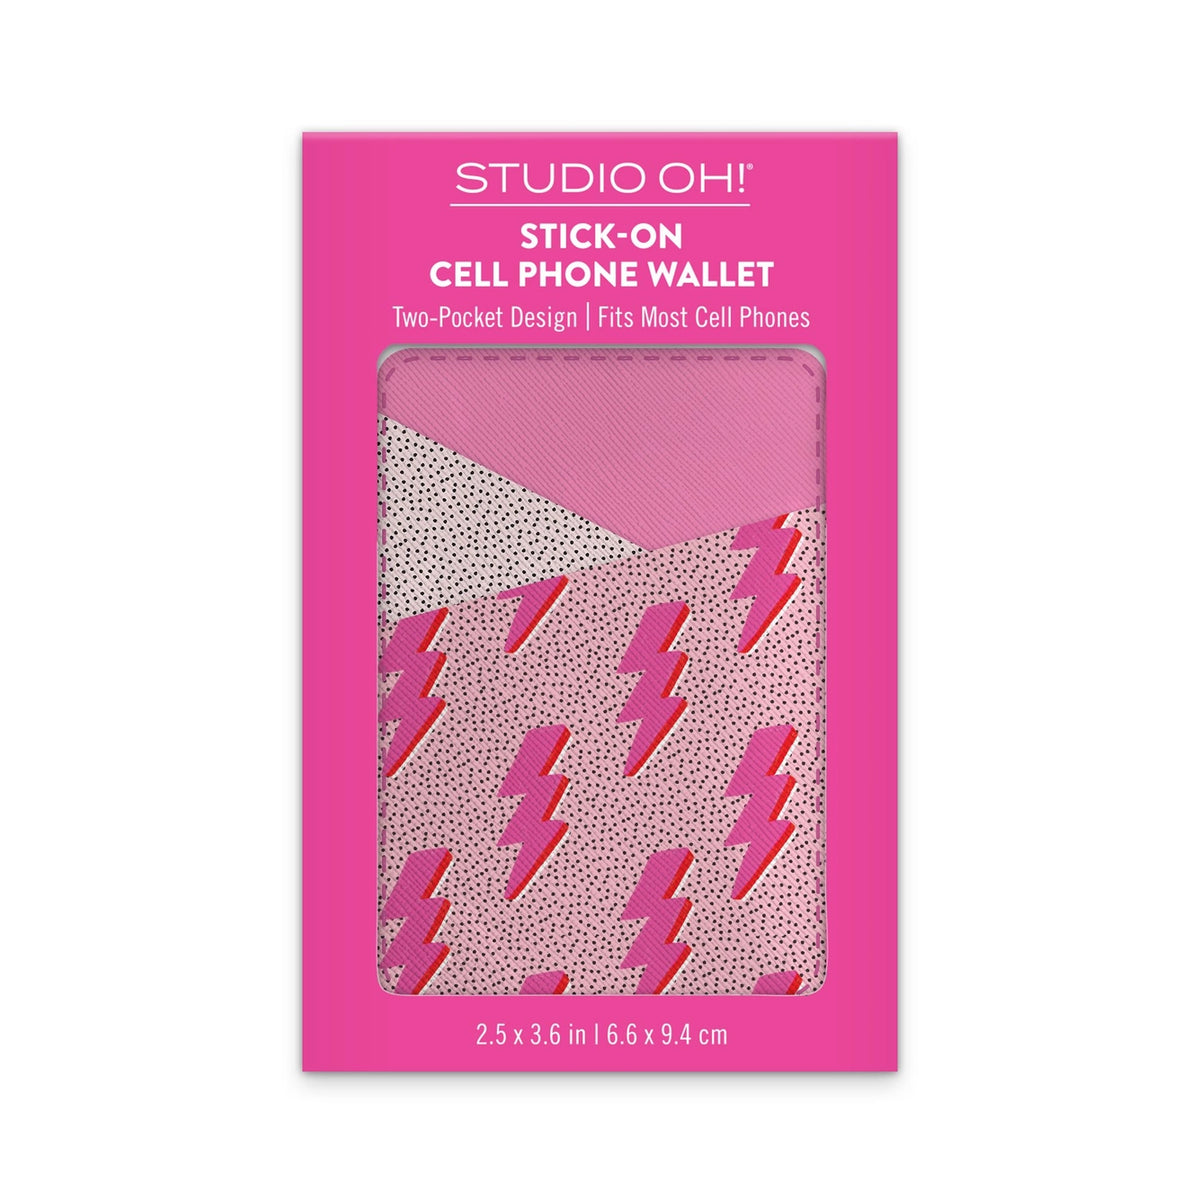 Stick On Cell Phone Wallet - Bolt